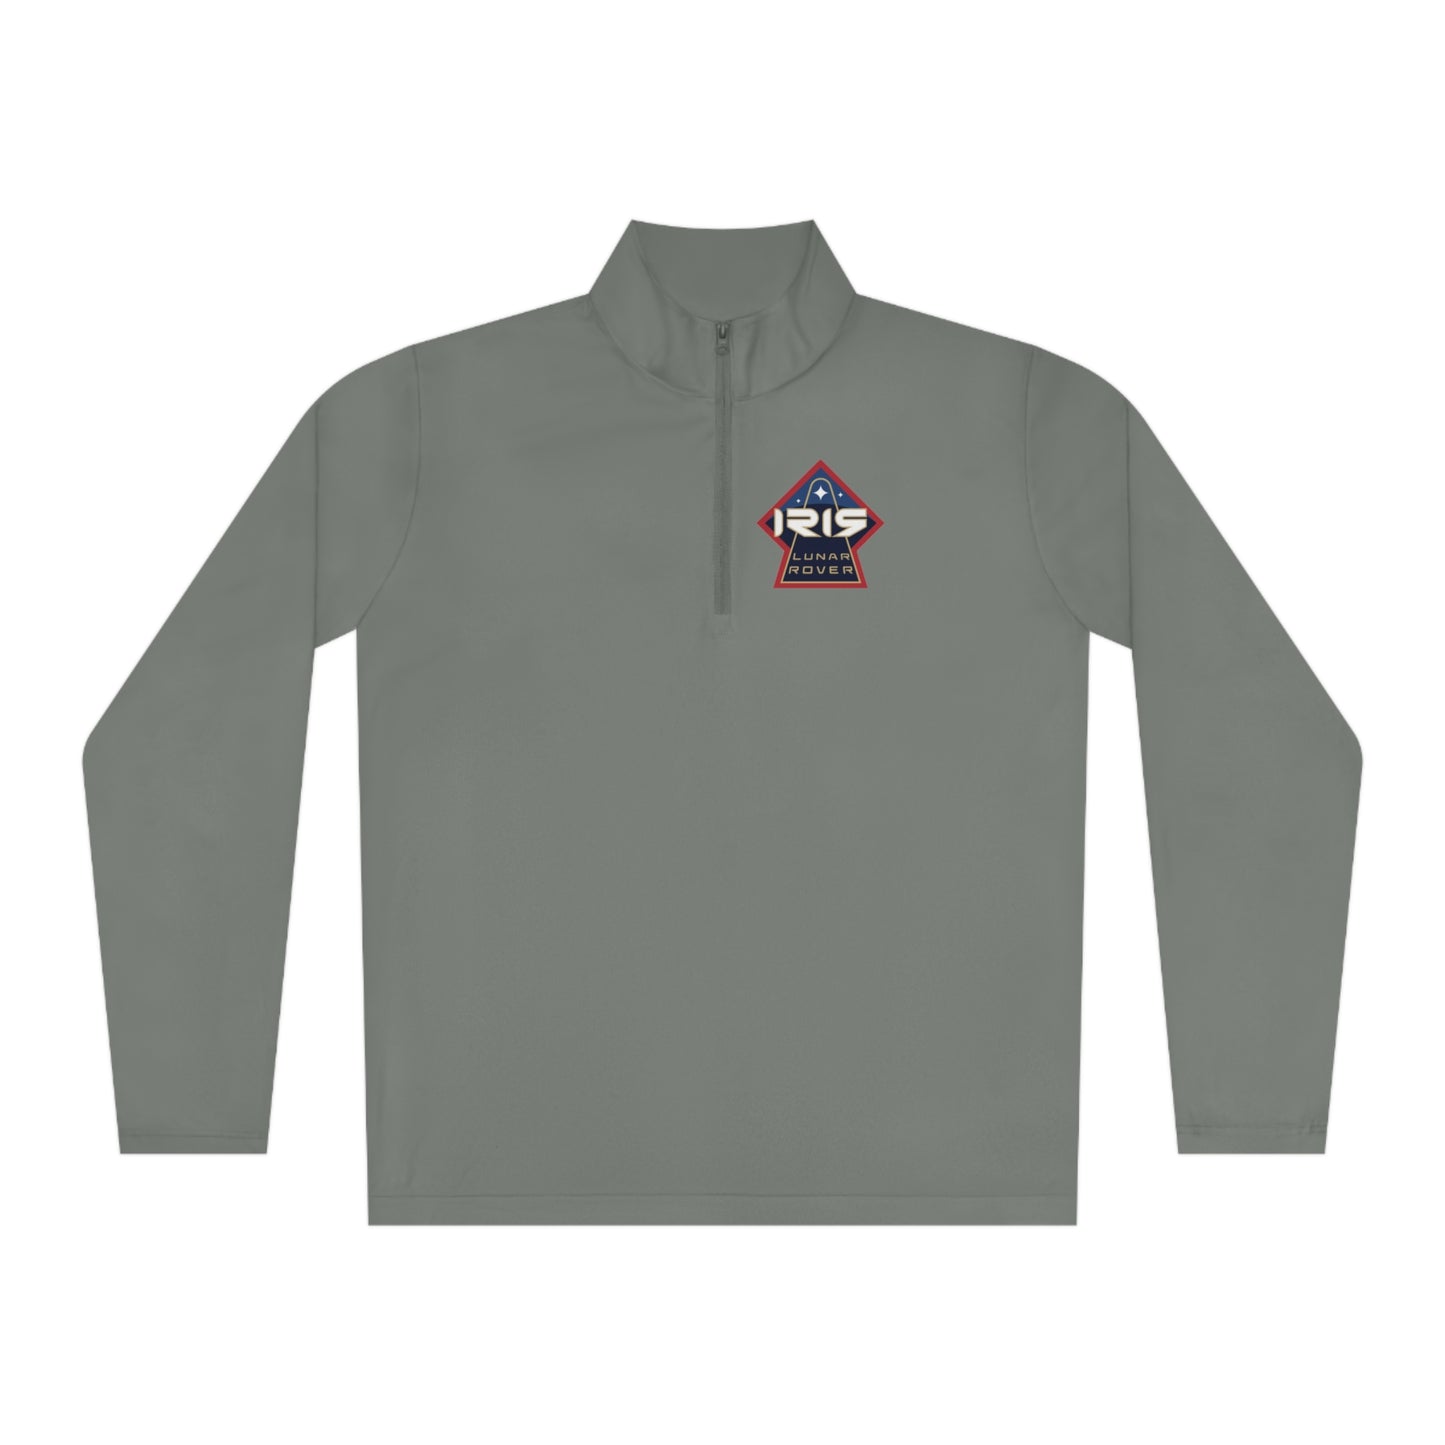 Team Donation & Free Limited-Edition Mission Jacket